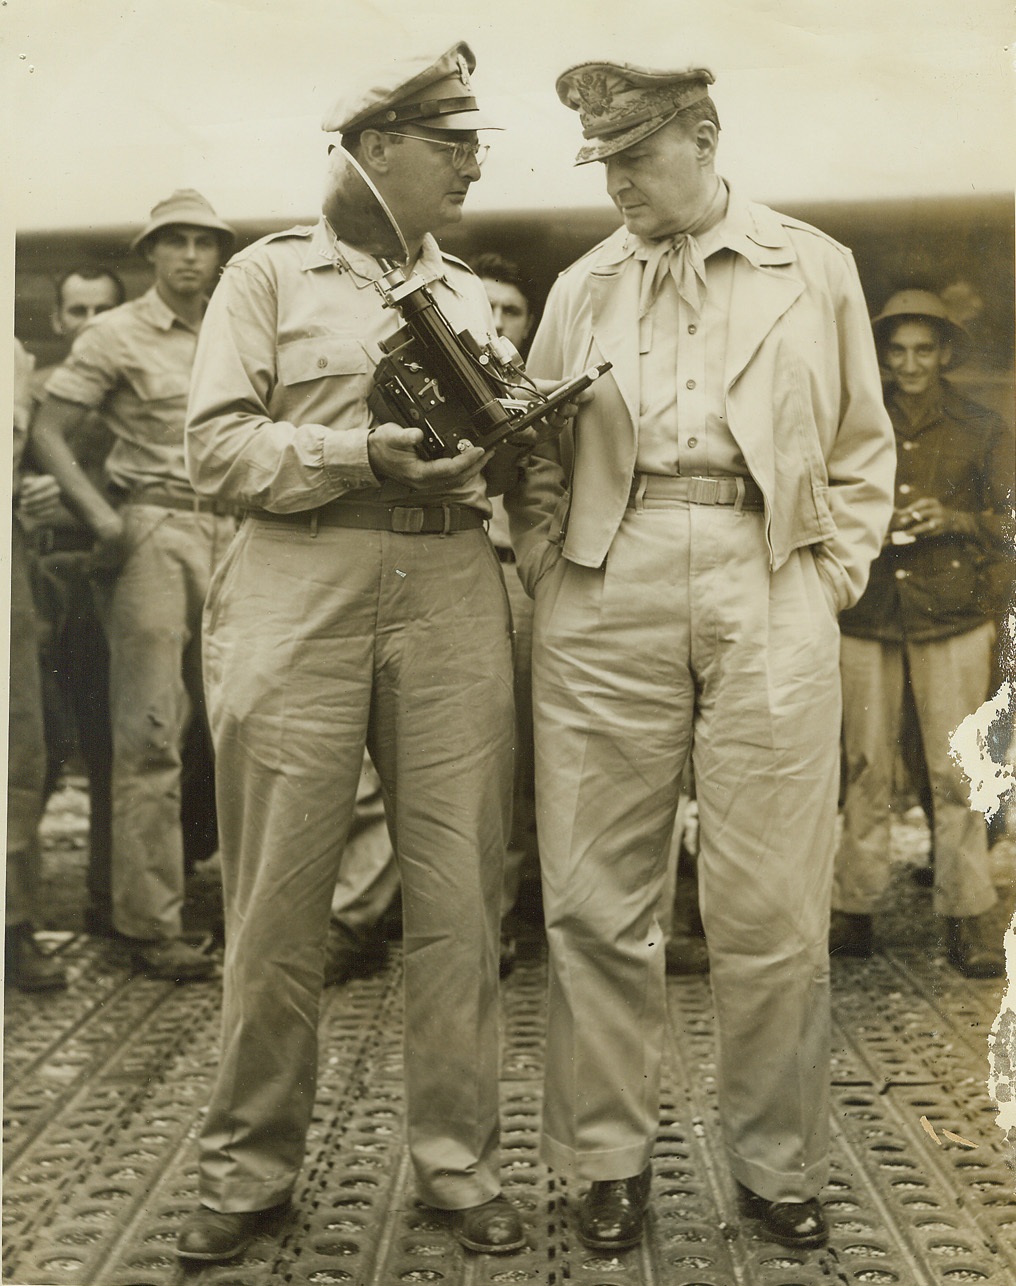 ACME Correspondent With MacArthur, 1/11/1944. NEW GUINEA -- Ware Correspondent Thomas L. Shafer, (left), Photographer for ACME Newspictures, Inc. is shown with Gen. Douglas MacArthur, Supreme Allied Commander in the Southwest Pacific, as Shafer explains the workings of a Speed Graphic Camera.  Credit: ( ACME Photo by Thomas L. Shafer for the War Picture Pool);